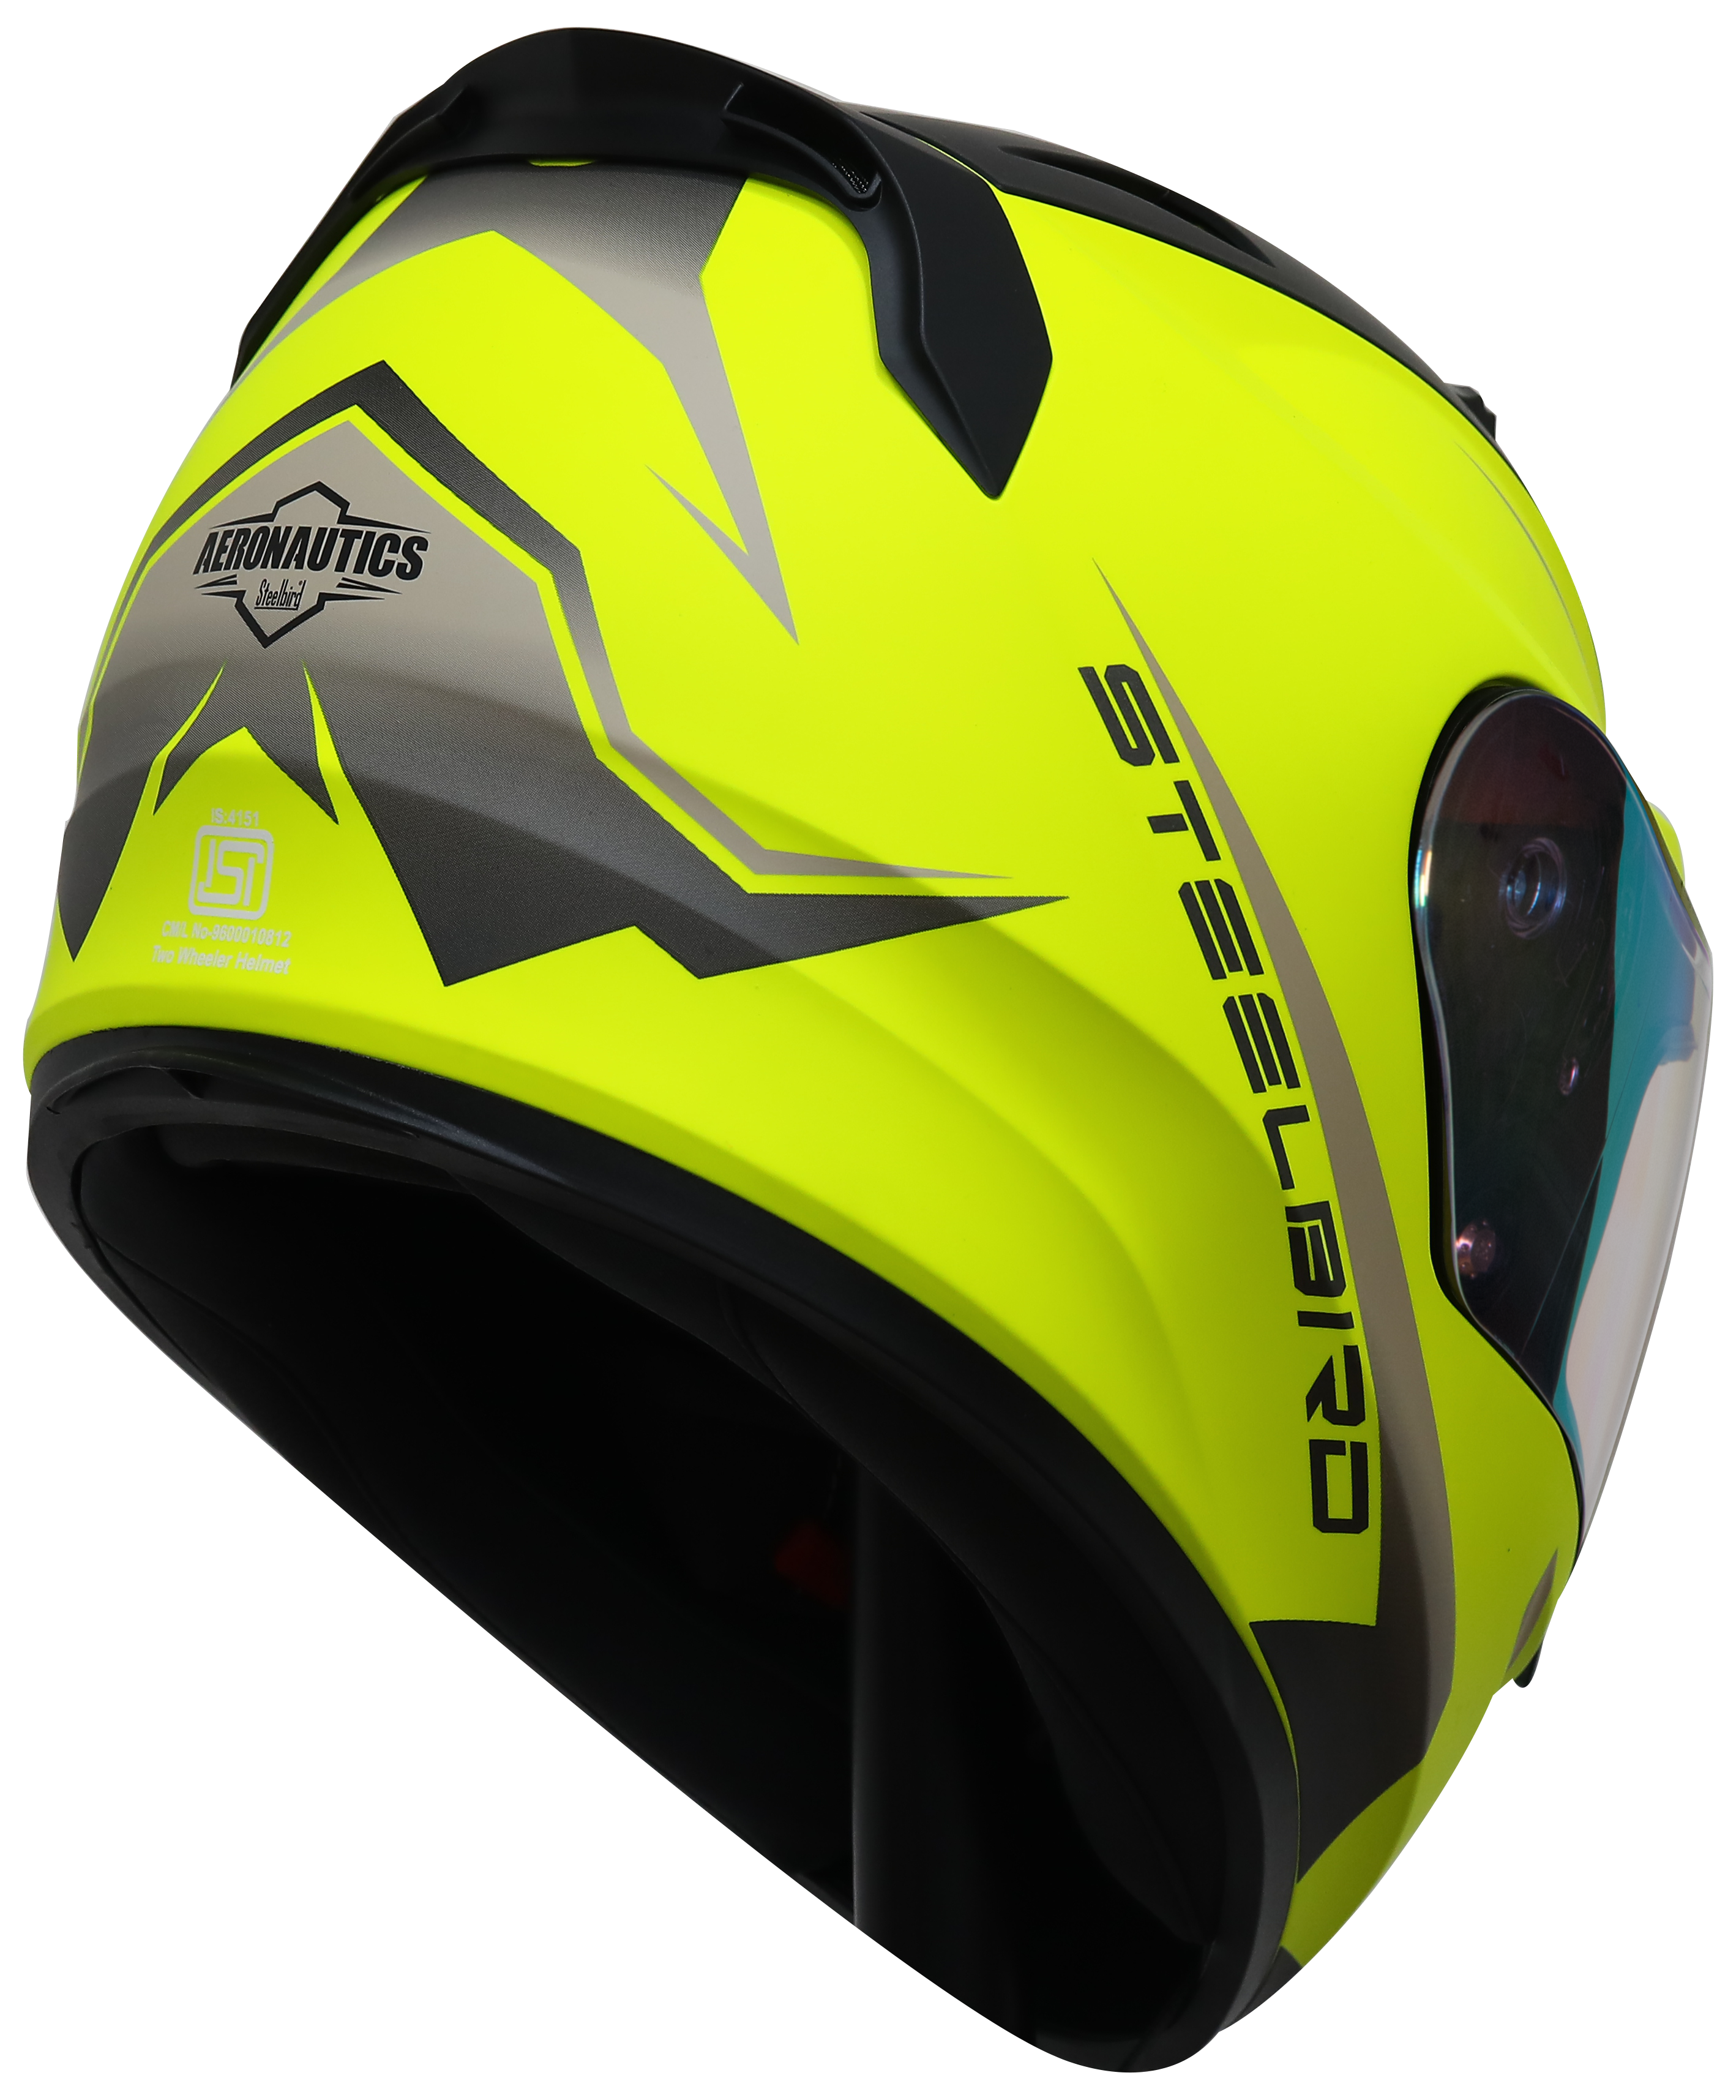 SA-1 WHIF GLOSSY FLUO NEON WITH DESERT STORM NIGHT VISION GREEN VISOR (WITH EXTRA FREE CLEAR VISOR)